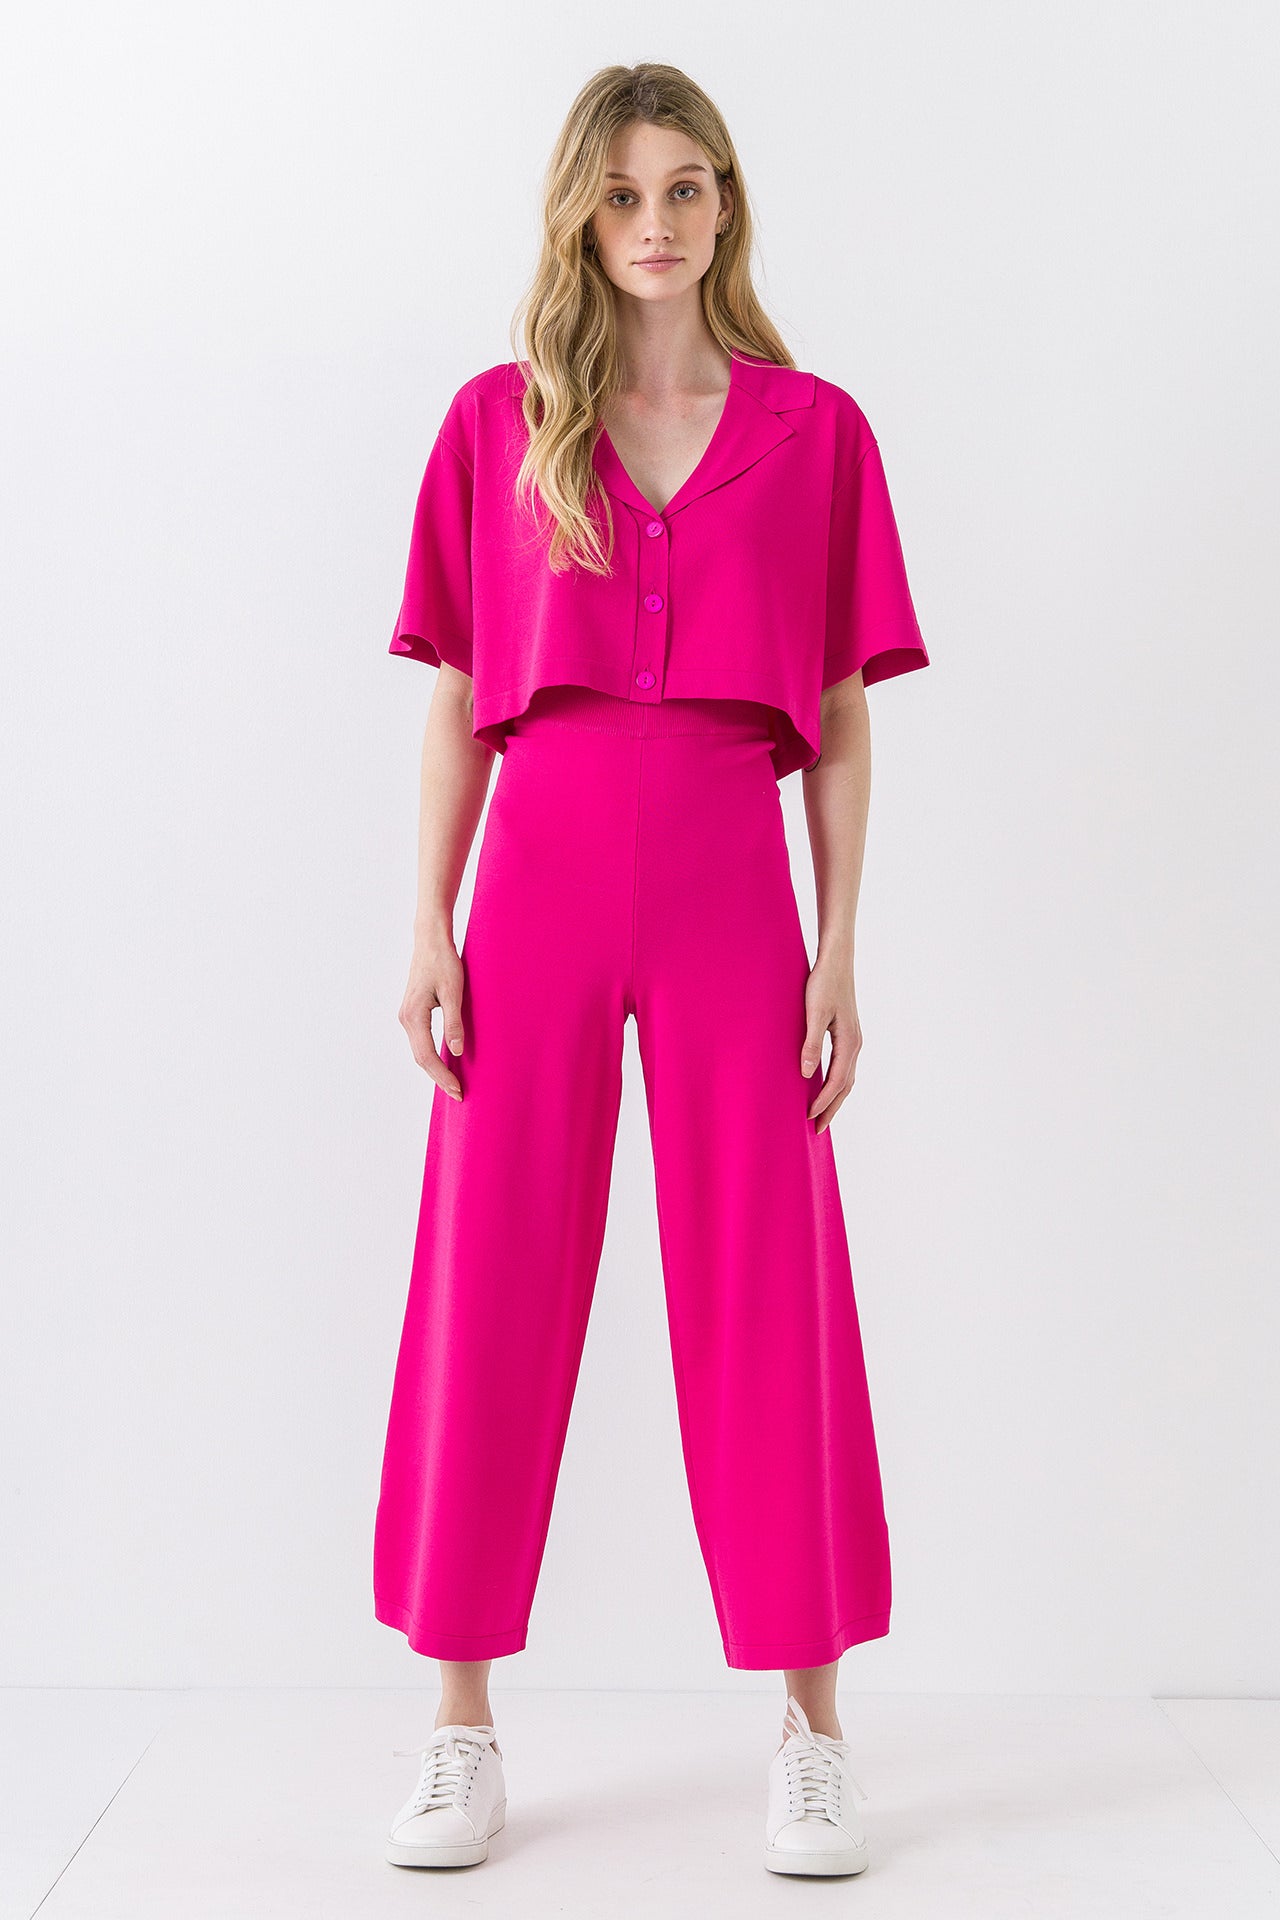 ENDLESS ROSE - Lounge Wear Knit Pants - PANTS available at Objectrare